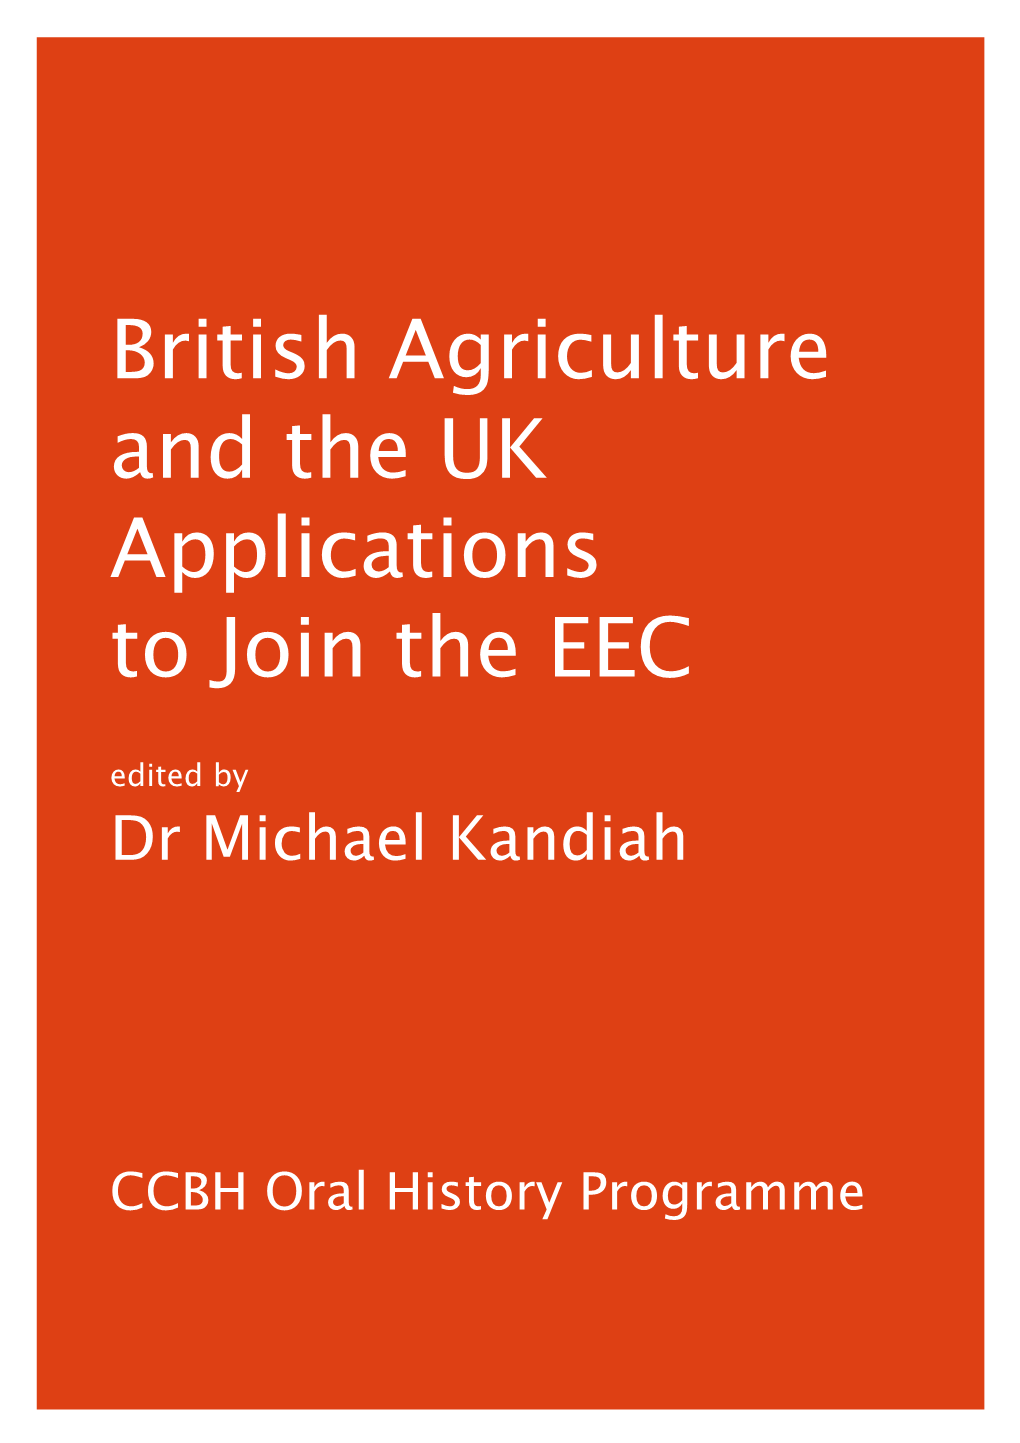 British Agriculture and the UK Applications to Join the EEC Edited by Dr Michael Kandiah